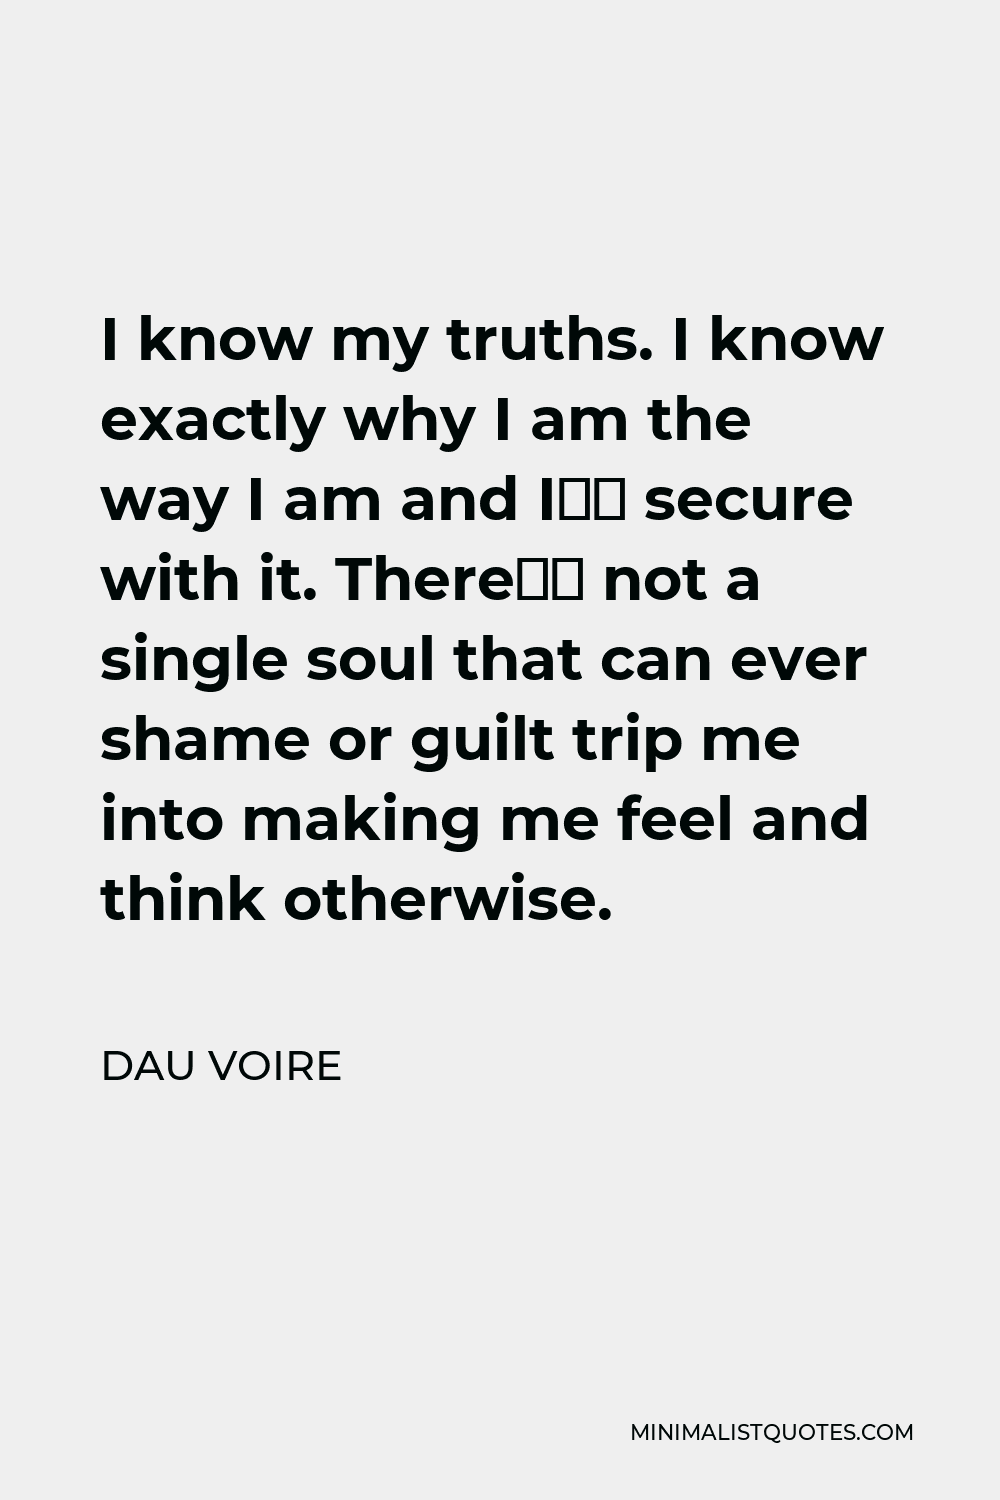 Dau Voire Quote: I know my truths. I know exactly why I am the way ...